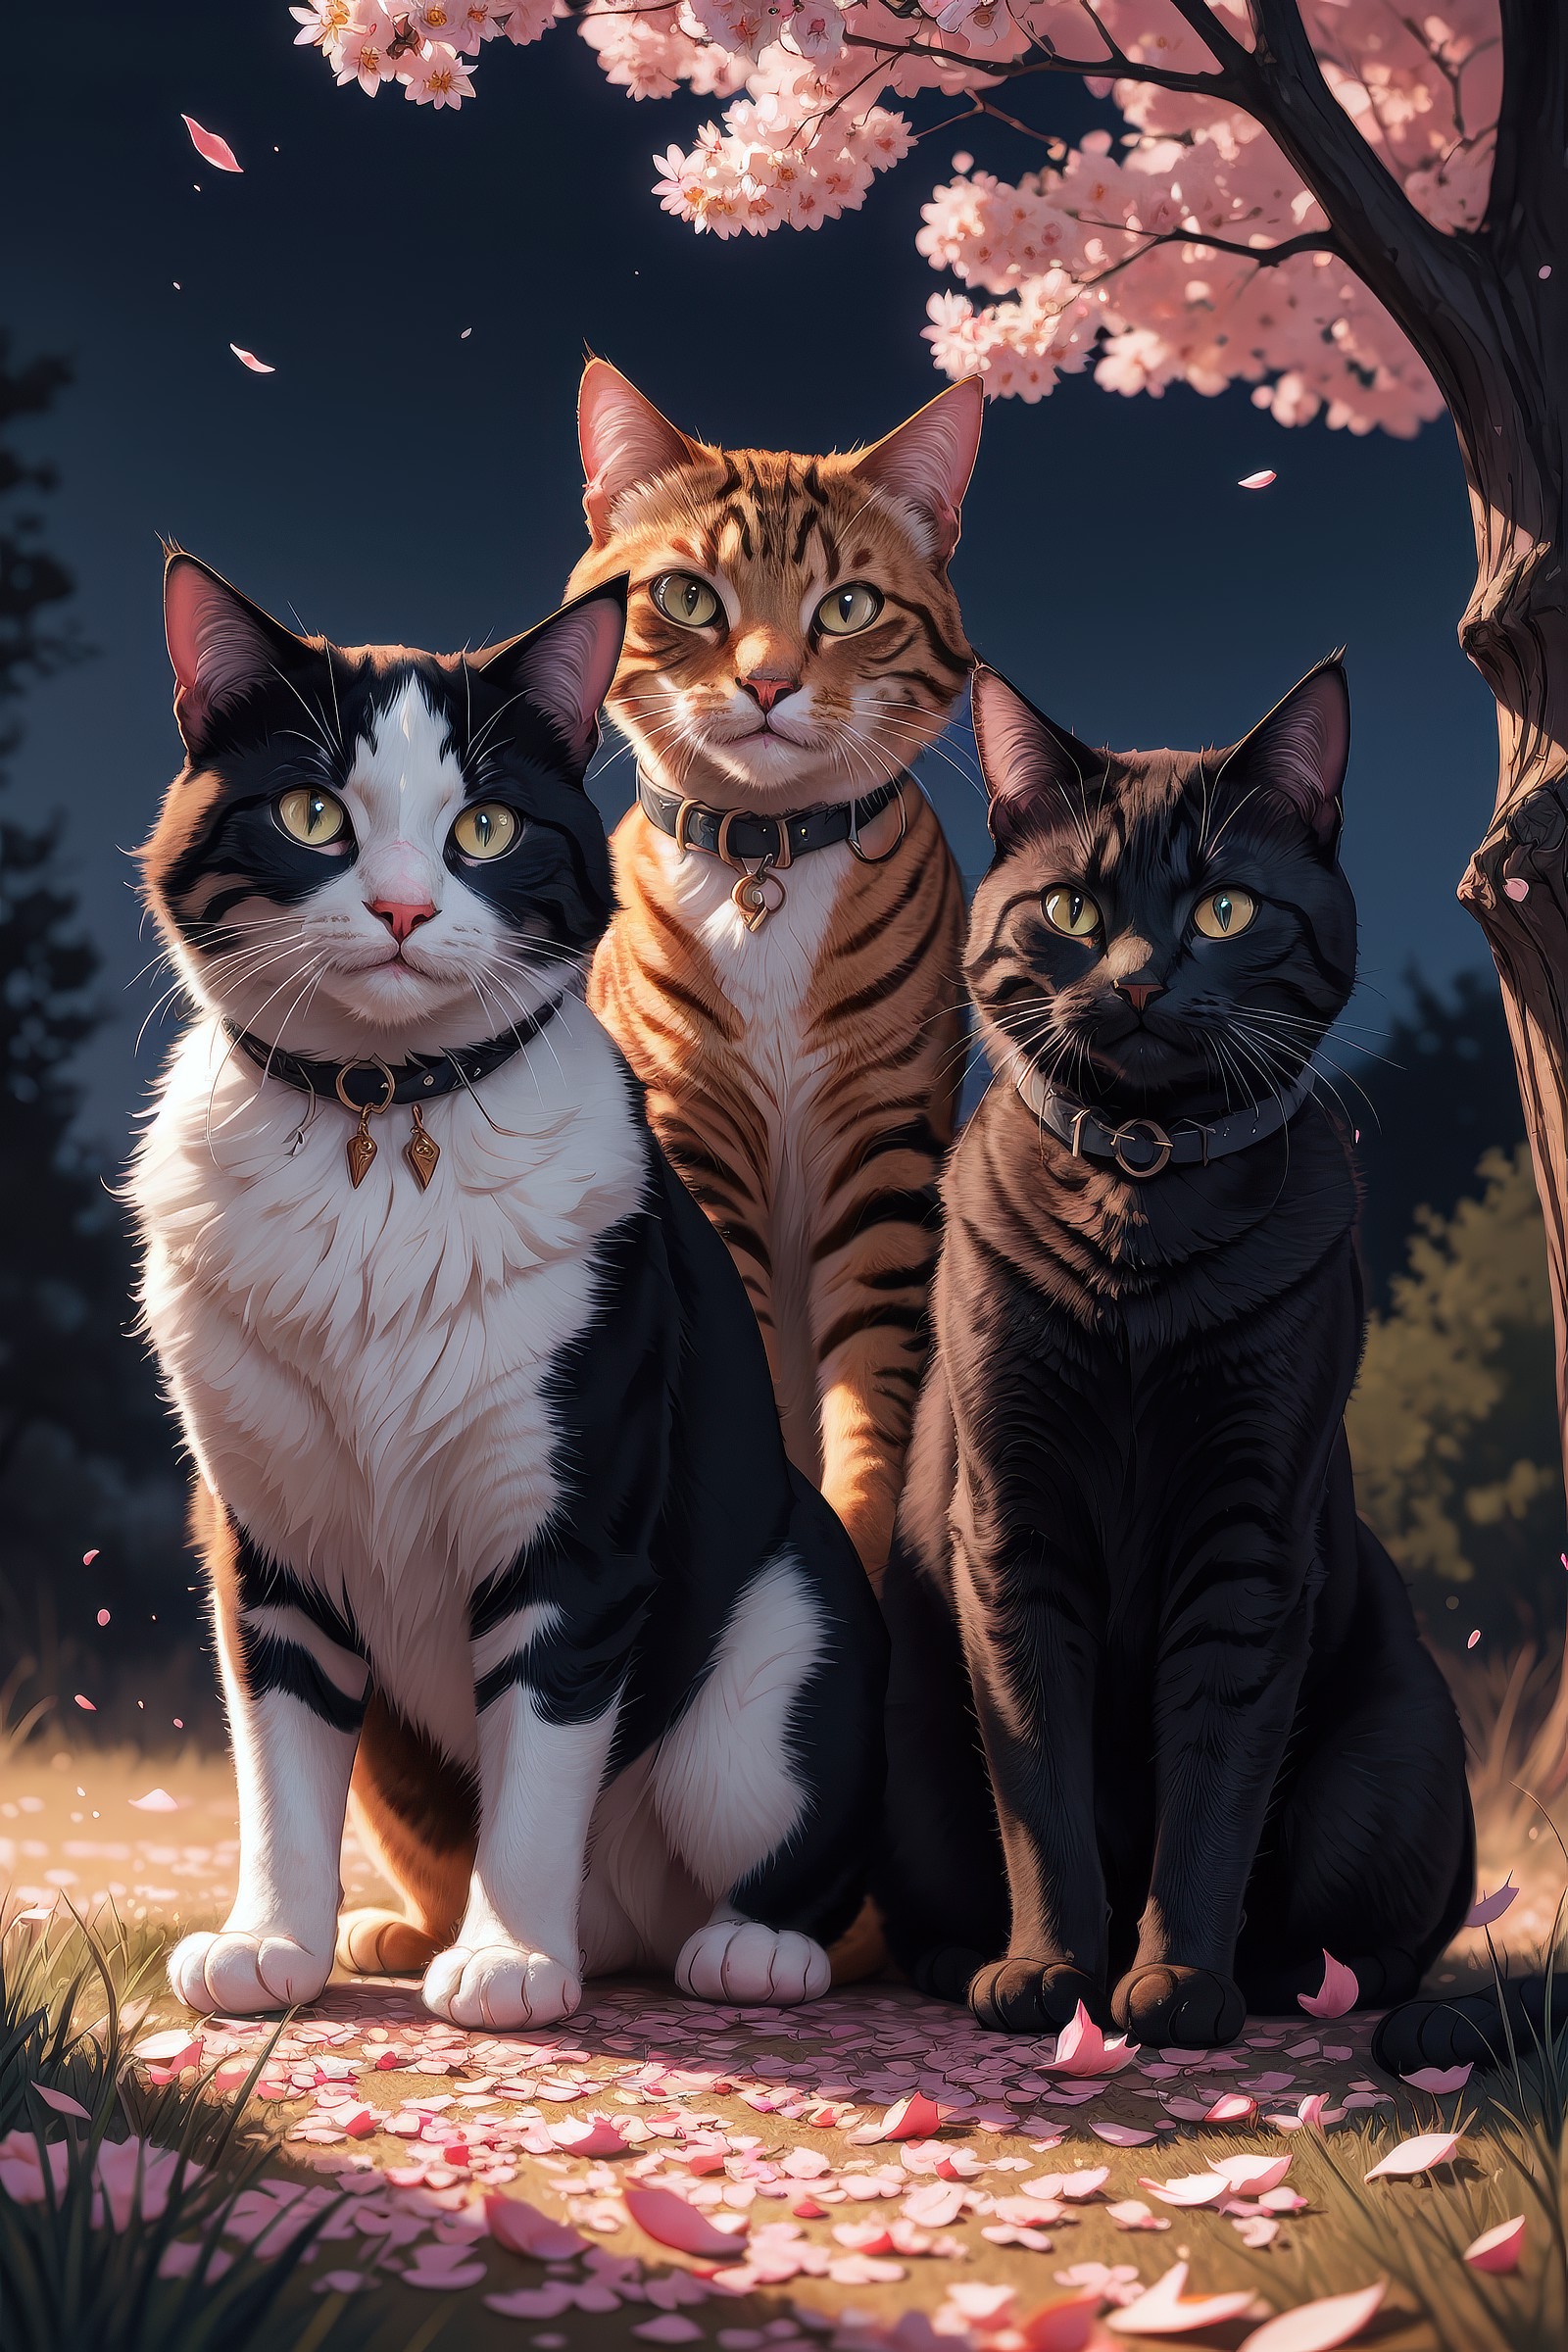 multiple cats behind a beautiful tree full of falling petals, night setting. realistic shaded lighting poster by ilya kuvs...